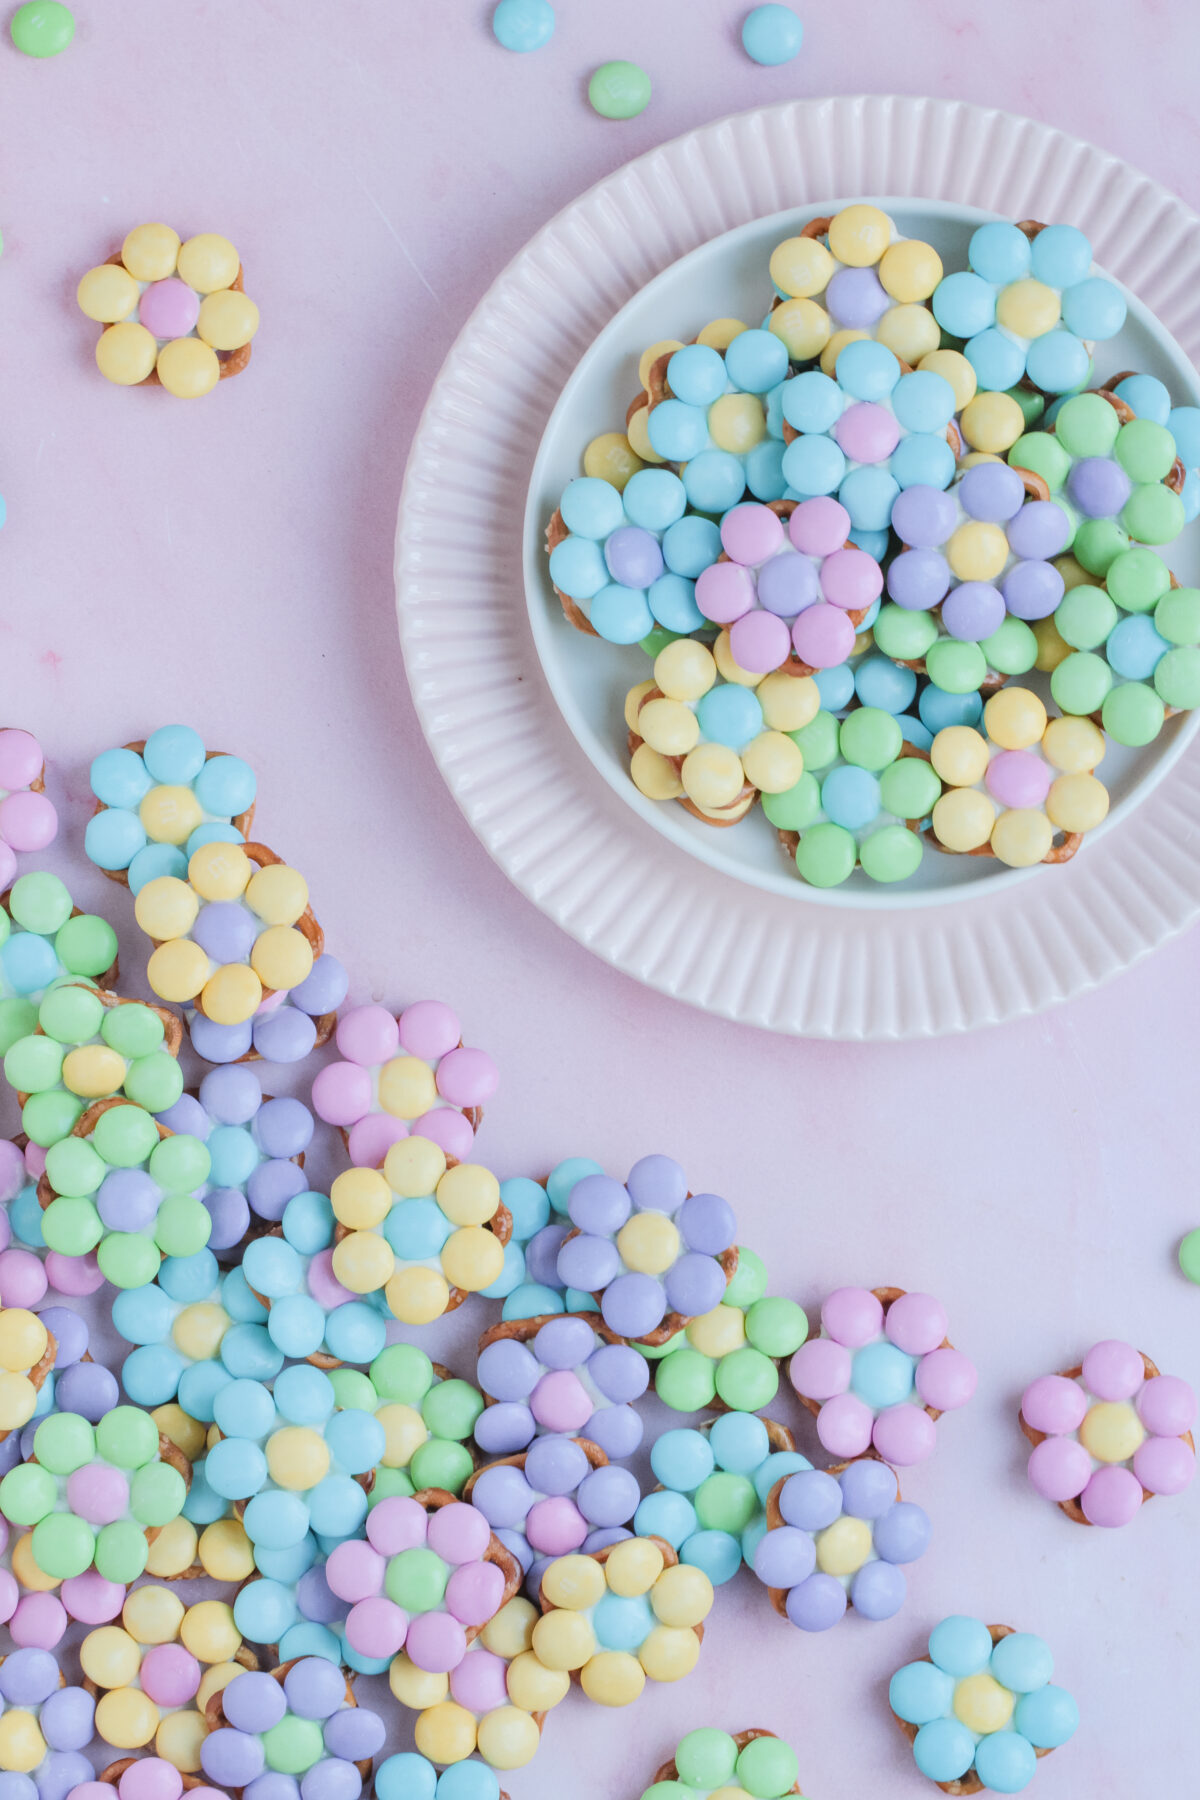 These Flower Pretzel Bites are a simple yet delightful spring treat that makes for a colourful snack that's as fun to make as it is to eat.